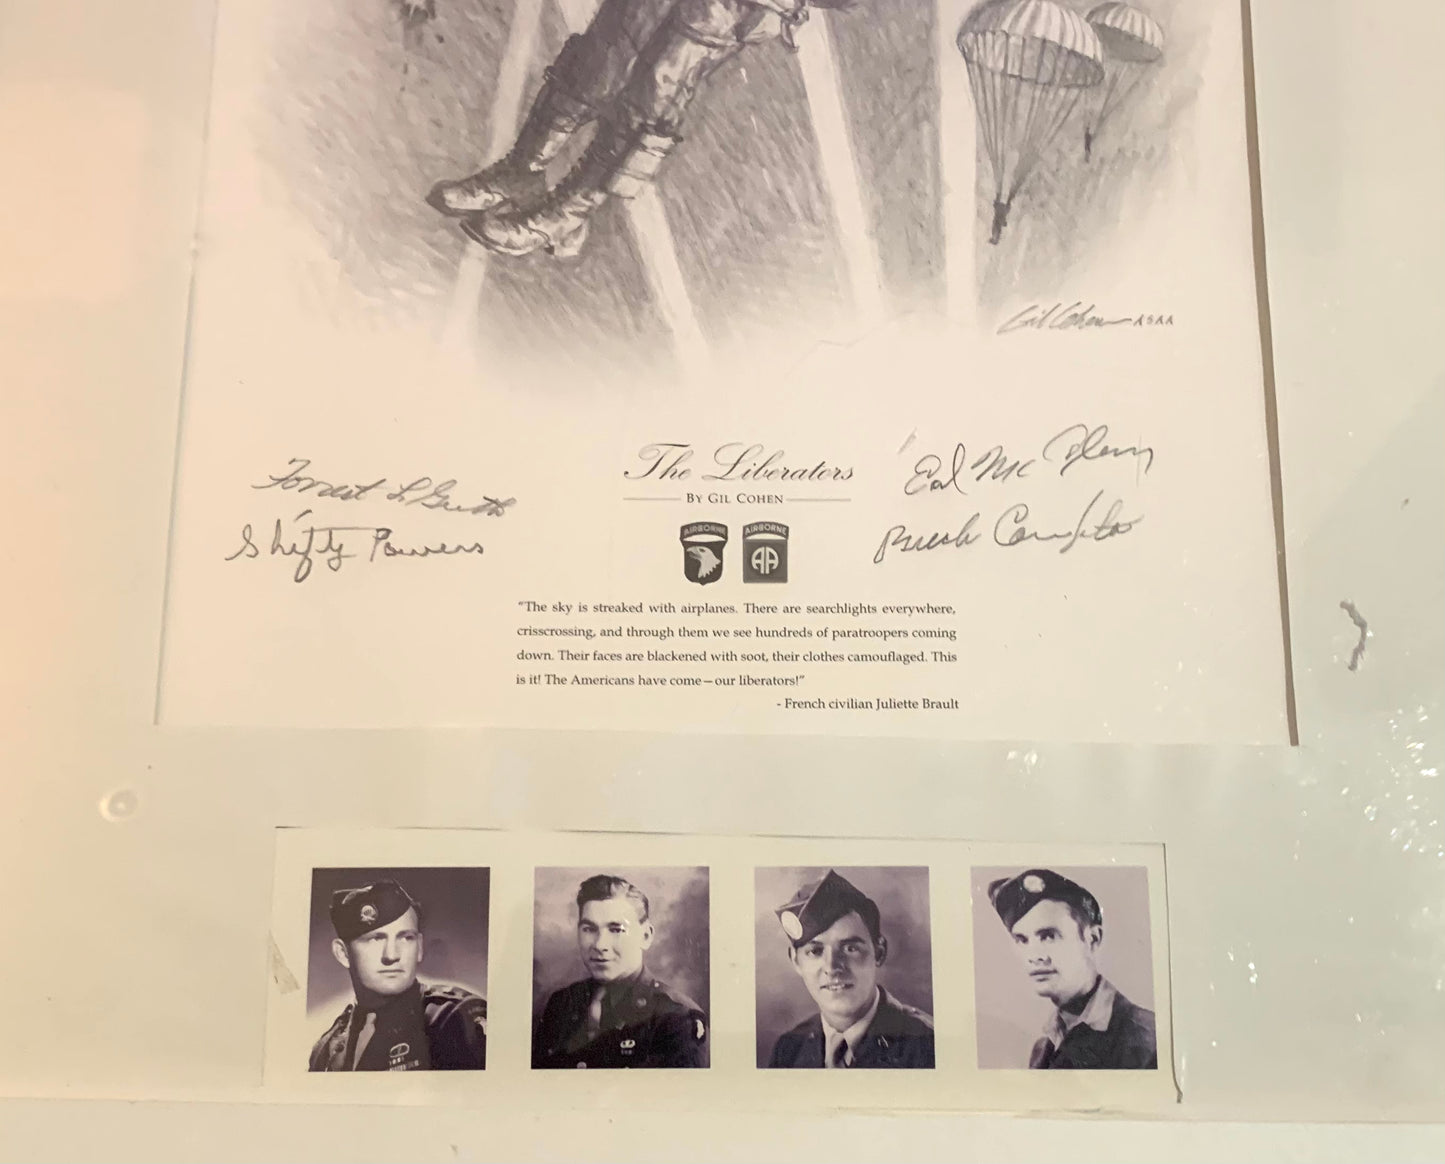 Band of Brothers print personally signed by 4 WW2 101st Easy Company Veterans including Shifty Powers and Buck Compton.